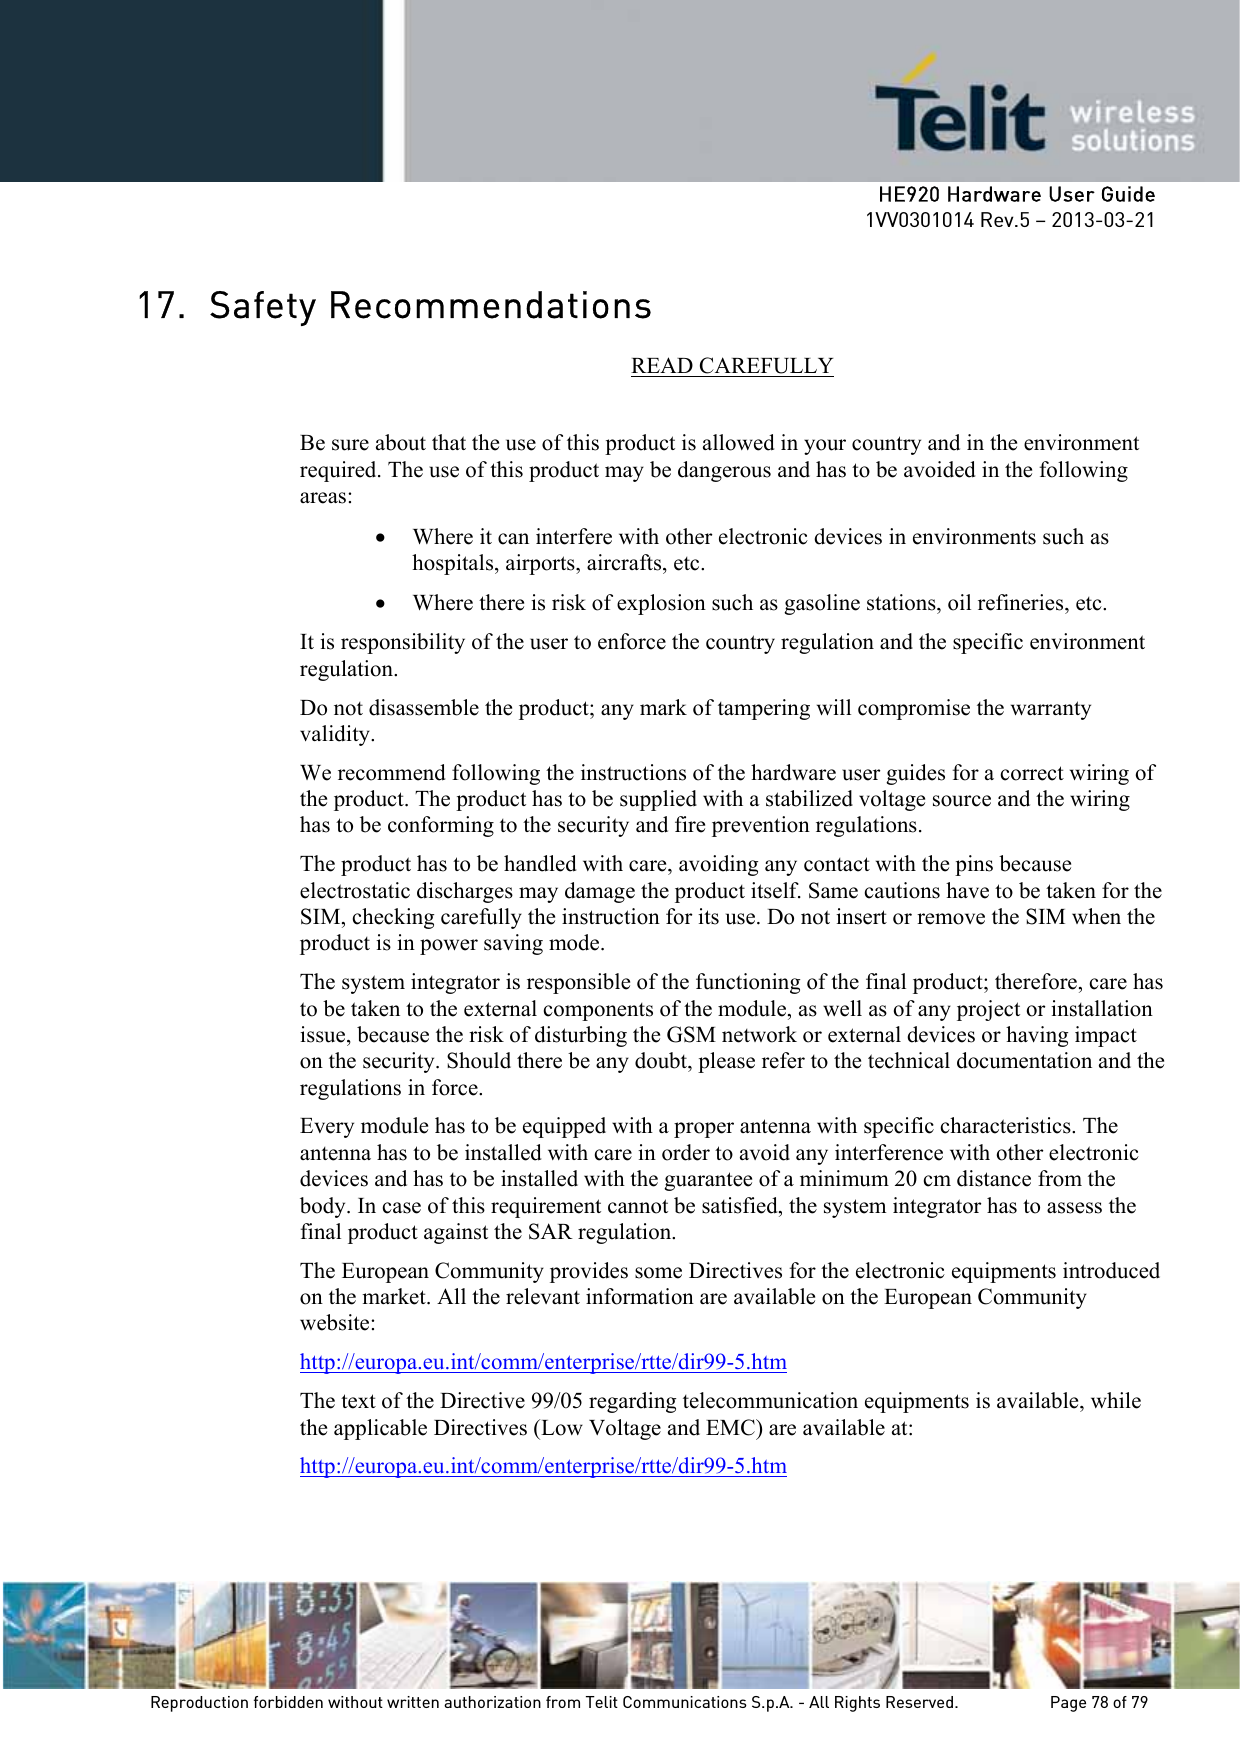     HE920 Hardware User Guide 1VV0301014 Rev.5 – 2013-03-21 Reproduction forbidden without written authorization from Telit Communications S.p.A. - All Rights Reserved.    Page 78 of 79  17. Safety Recommendations READ CAREFULLY  Be sure about that the use of this product is allowed in your country and in the environment required. The use of this product may be dangerous and has to be avoided in the following areas: • Where it can interfere with other electronic devices in environments such as hospitals, airports, aircrafts, etc. • Where there is risk of explosion such as gasoline stations, oil refineries, etc.  It is responsibility of the user to enforce the country regulation and the specific environment regulation. Do not disassemble the product; any mark of tampering will compromise the warranty validity. We recommend following the instructions of the hardware user guides for a correct wiring of the product. The product has to be supplied with a stabilized voltage source and the wiring has to be conforming to the security and fire prevention regulations. The product has to be handled with care, avoiding any contact with the pins because electrostatic discharges may damage the product itself. Same cautions have to be taken for the SIM, checking carefully the instruction for its use. Do not insert or remove the SIM when the product is in power saving mode. The system integrator is responsible of the functioning of the final product; therefore, care has to be taken to the external components of the module, as well as of any project or installation issue, because the risk of disturbing the GSM network or external devices or having impact on the security. Should there be any doubt, please refer to the technical documentation and the regulations in force. Every module has to be equipped with a proper antenna with specific characteristics. The antenna has to be installed with care in order to avoid any interference with other electronic devices and has to be installed with the guarantee of a minimum 20 cm distance from the body. In case of this requirement cannot be satisfied, the system integrator has to assess the final product against the SAR regulation. The European Community provides some Directives for the electronic equipments introduced on the market. All the relevant information are available on the European Community website: http://europa.eu.int/comm/enterprise/rtte/dir99-5.htm The text of the Directive 99/05 regarding telecommunication equipments is available, while the applicable Directives (Low Voltage and EMC) are available at: http://europa.eu.int/comm/enterprise/rtte/dir99-5.htm  